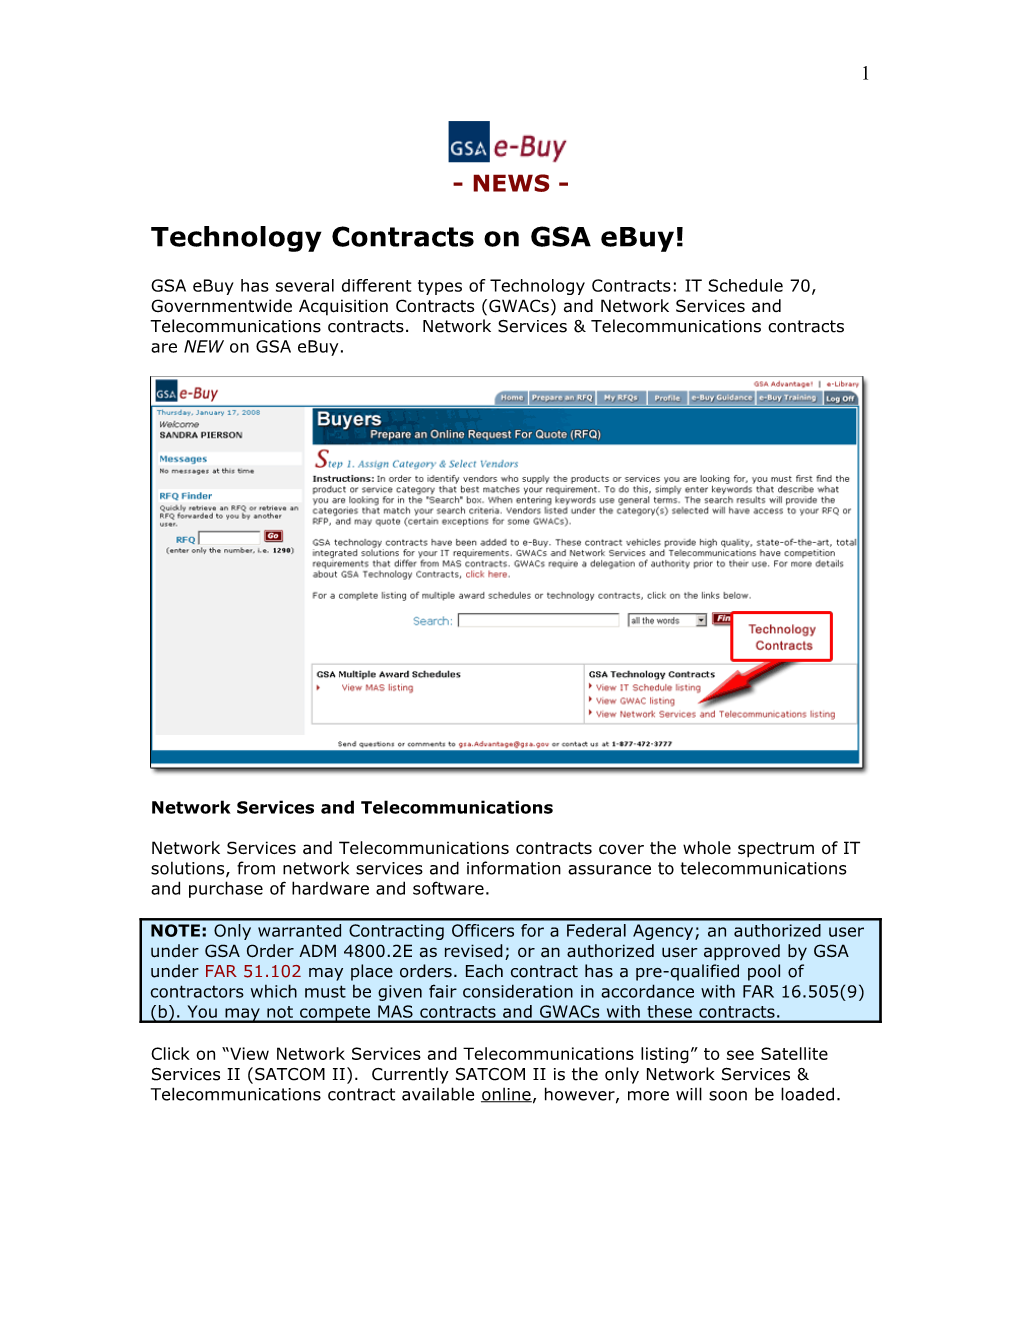 Technology Contracts on GSA Ebuy!